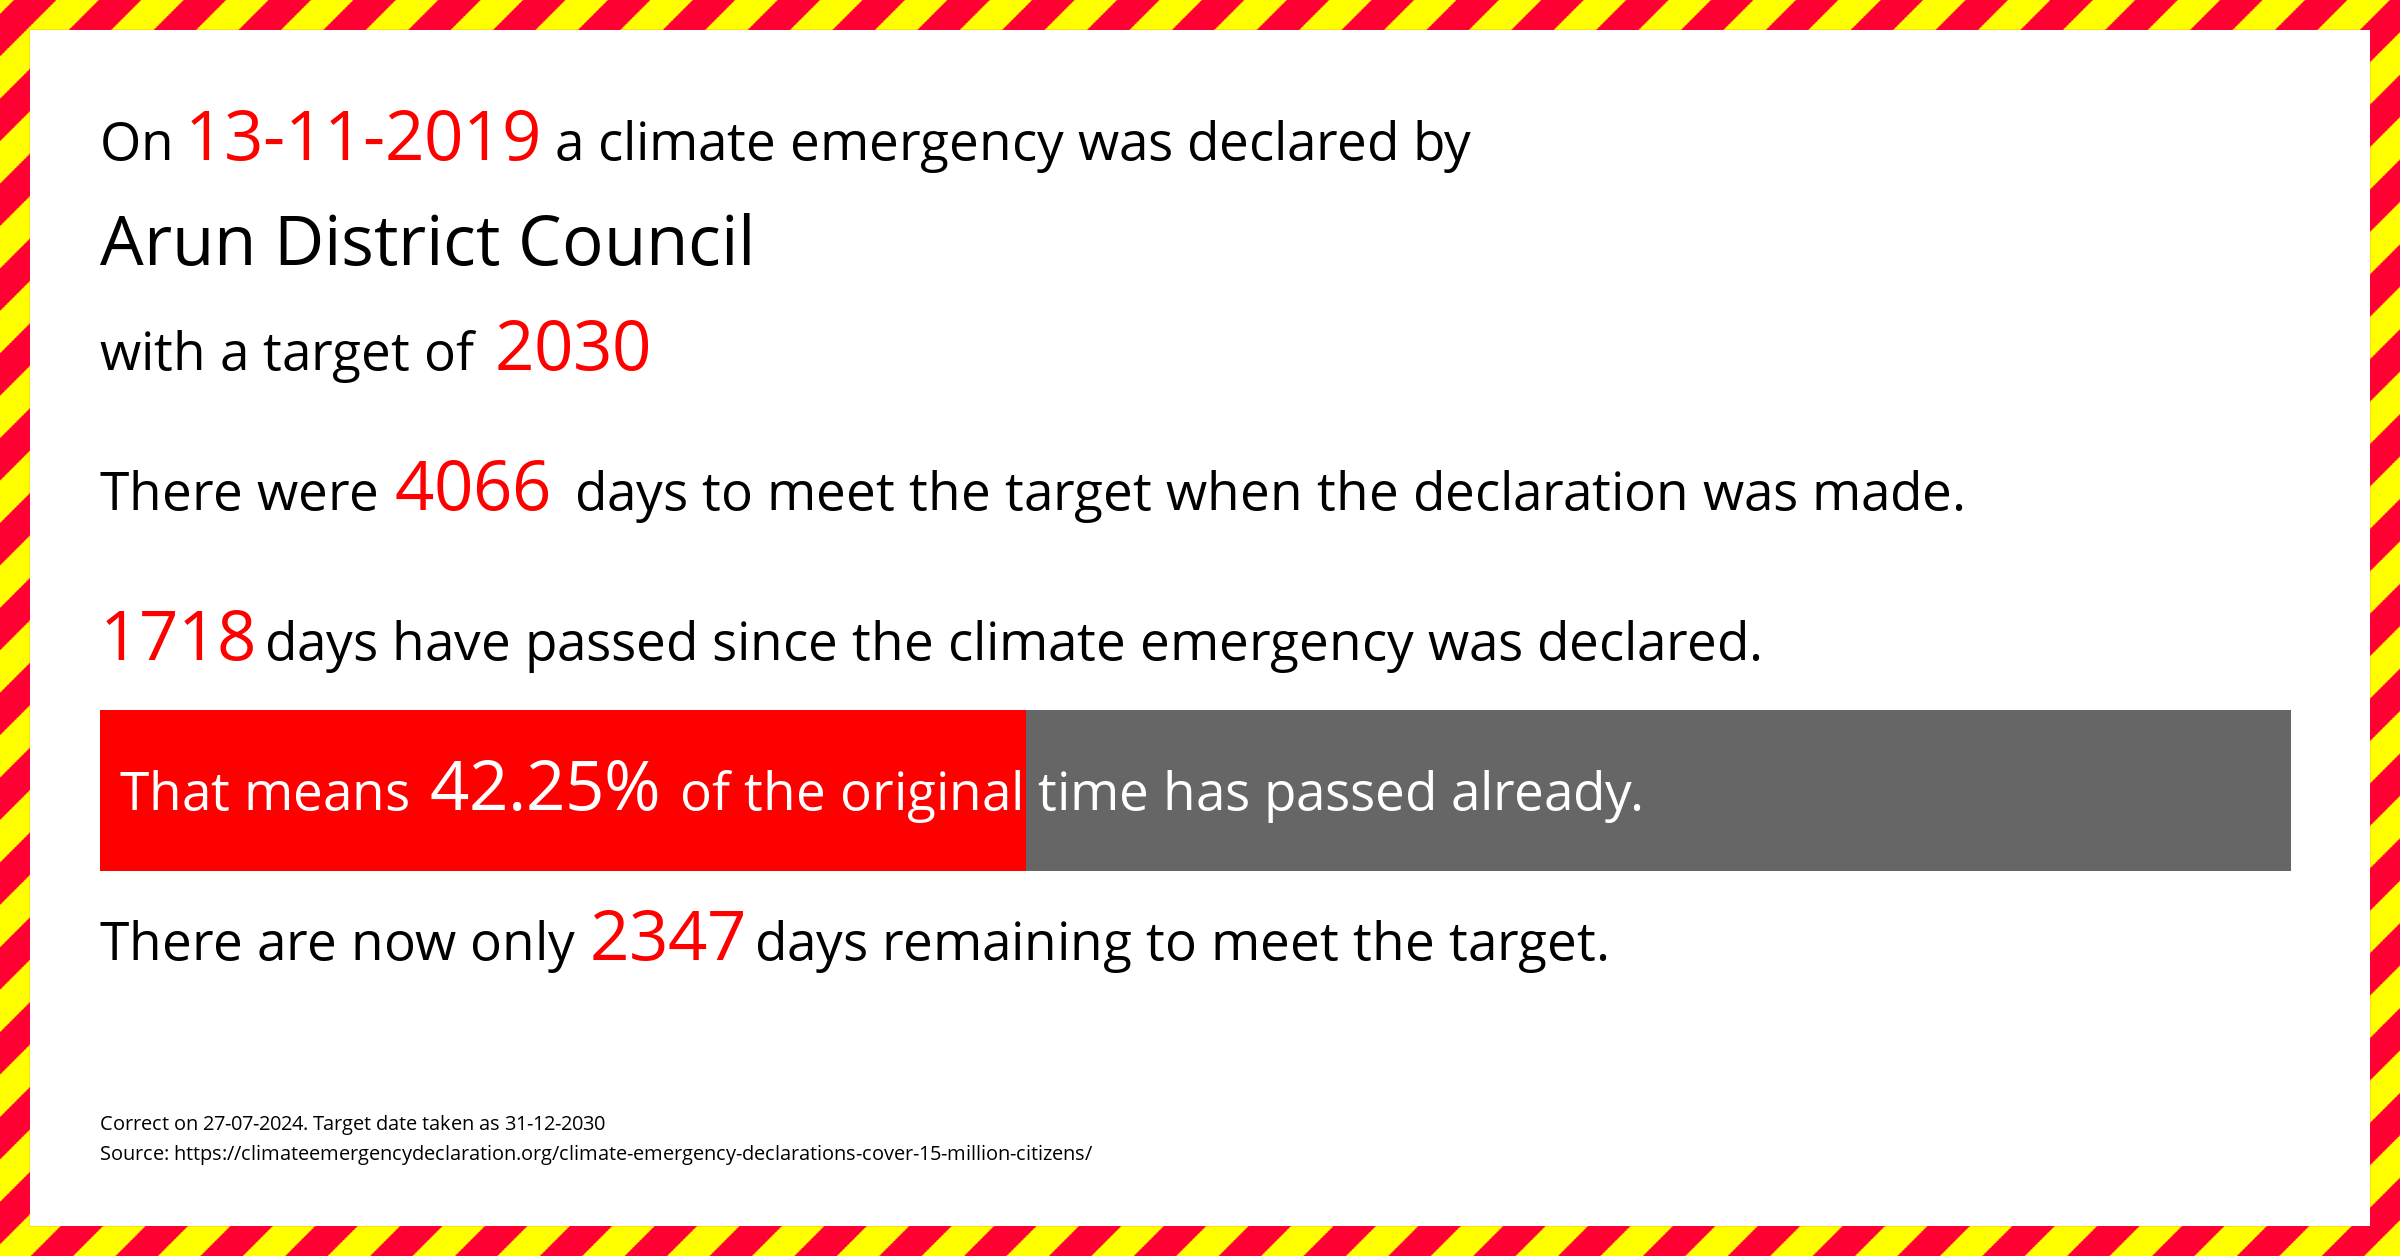 Arun District Council  declared a Climate emergency on Wednesday 13th November 2019, with a target of 2030.